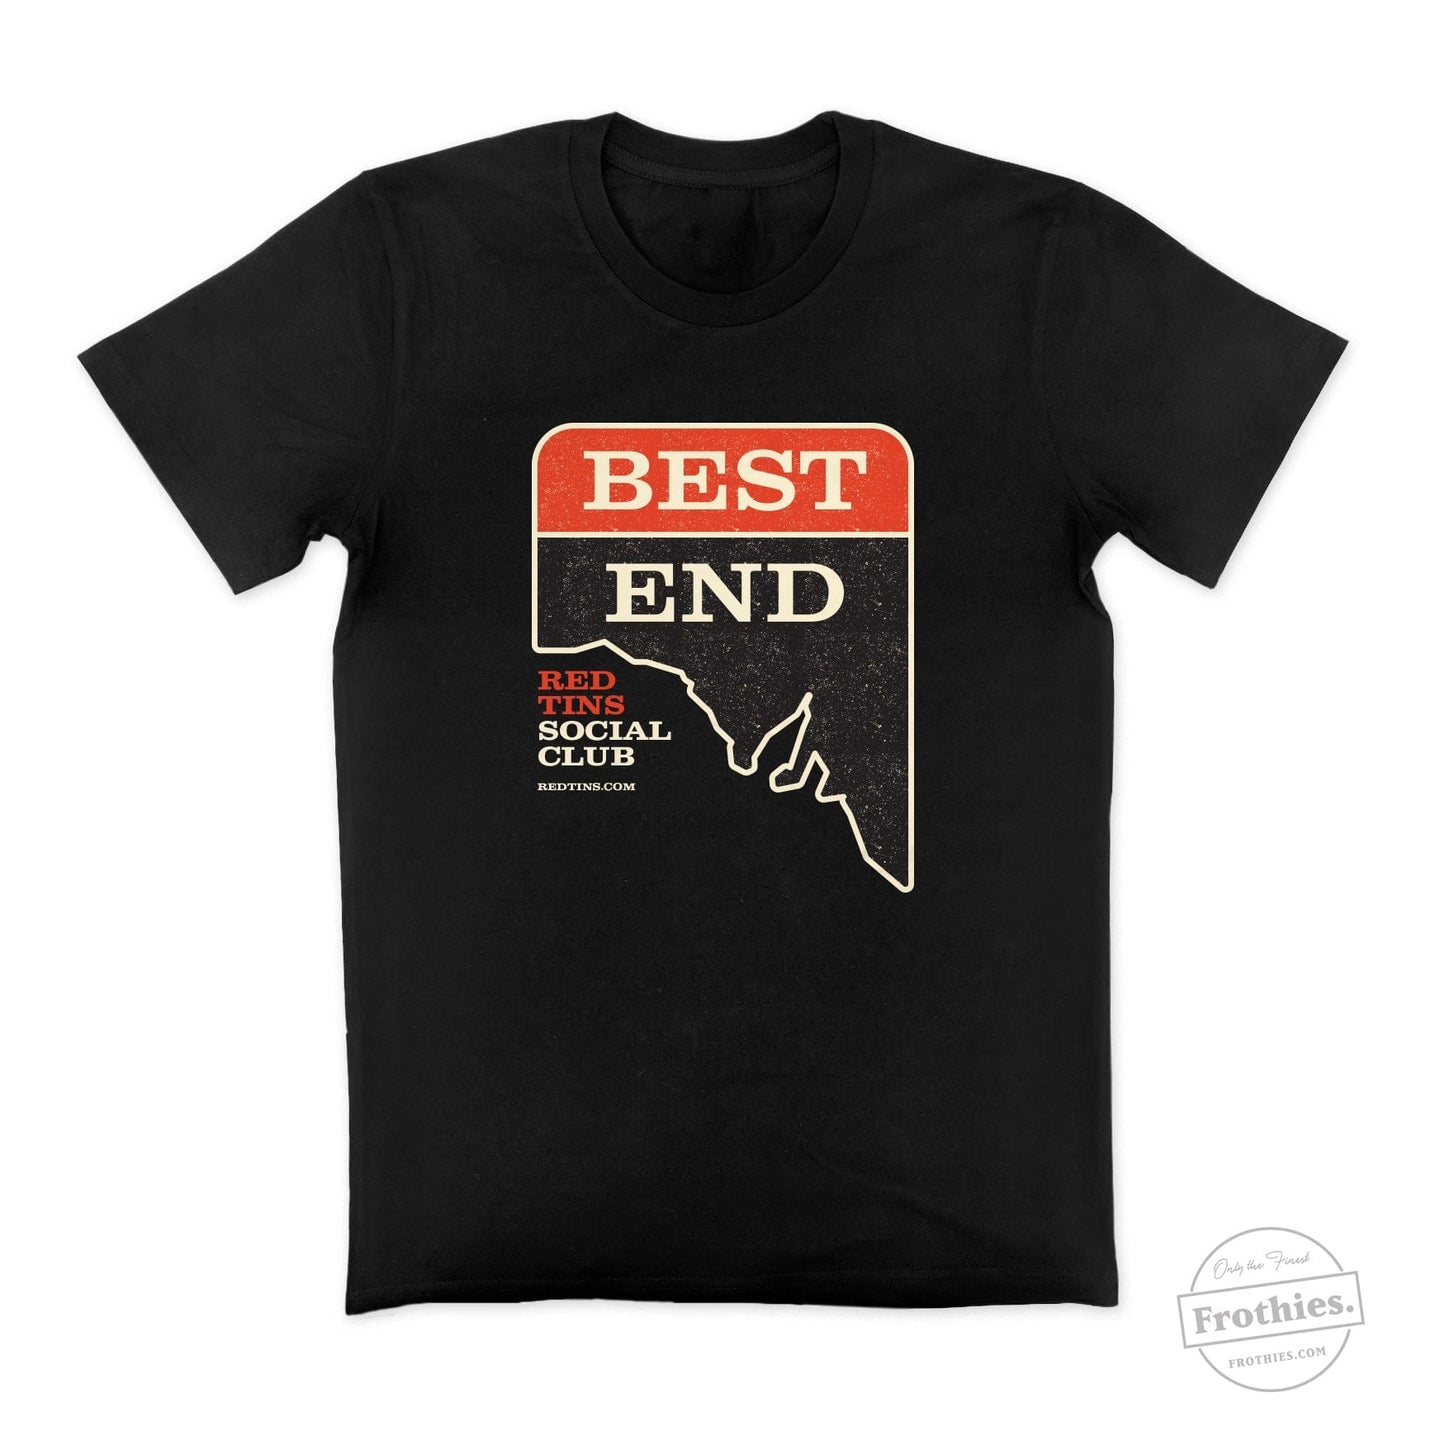 The Best End, Vintage, State Tee T-Shirt Red Tins